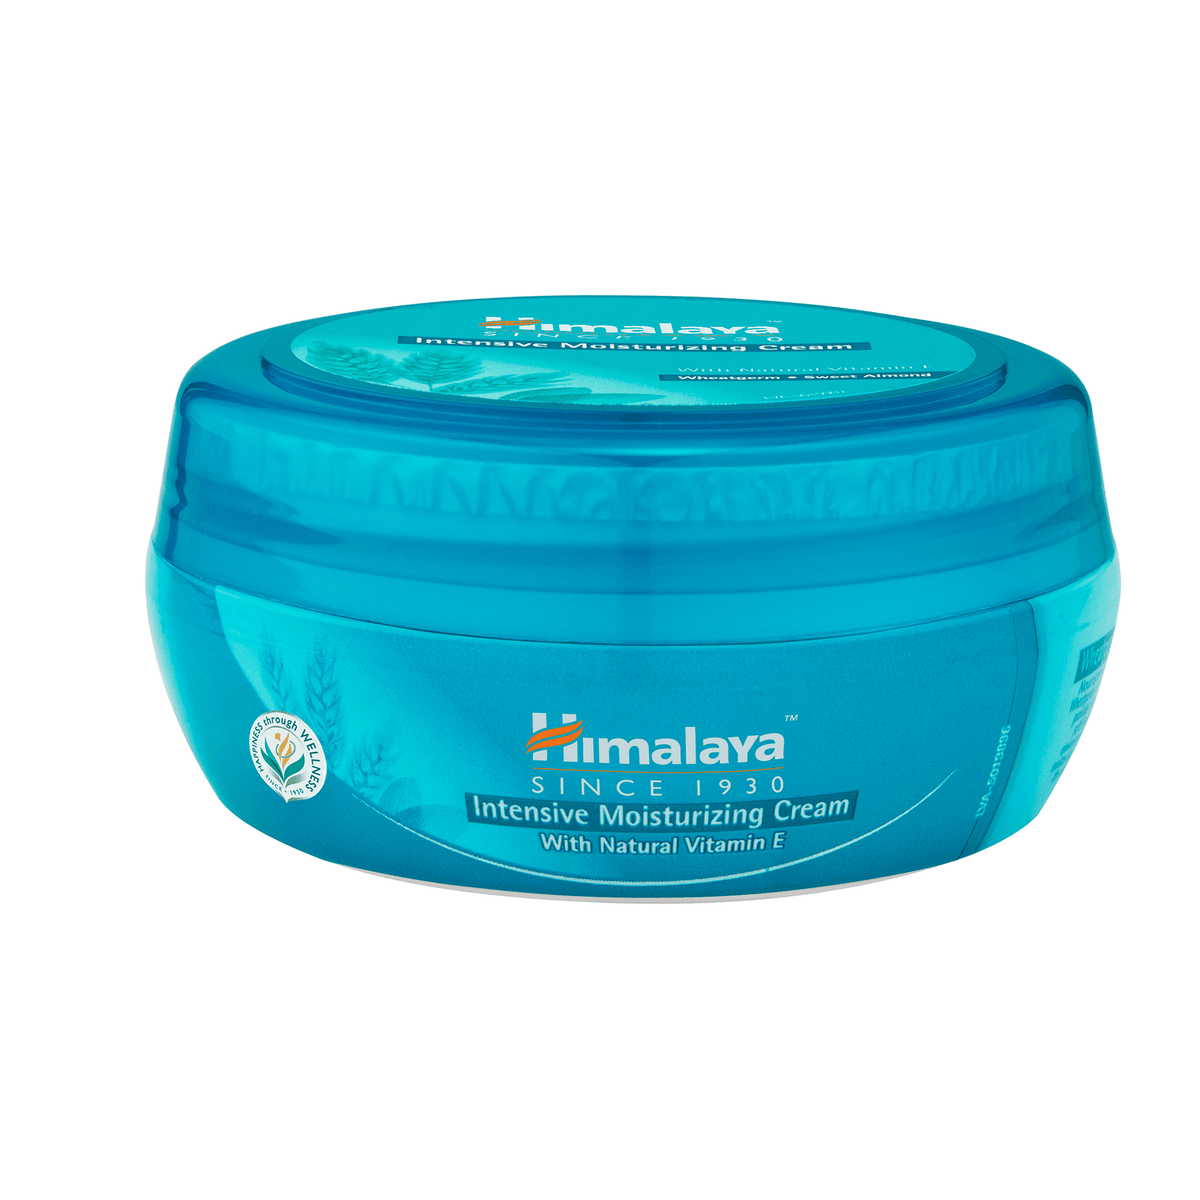 Himalaya Body Cream Intensive Moisturizing & protects Even the Extremely Dry Areas of Your Skin -250m